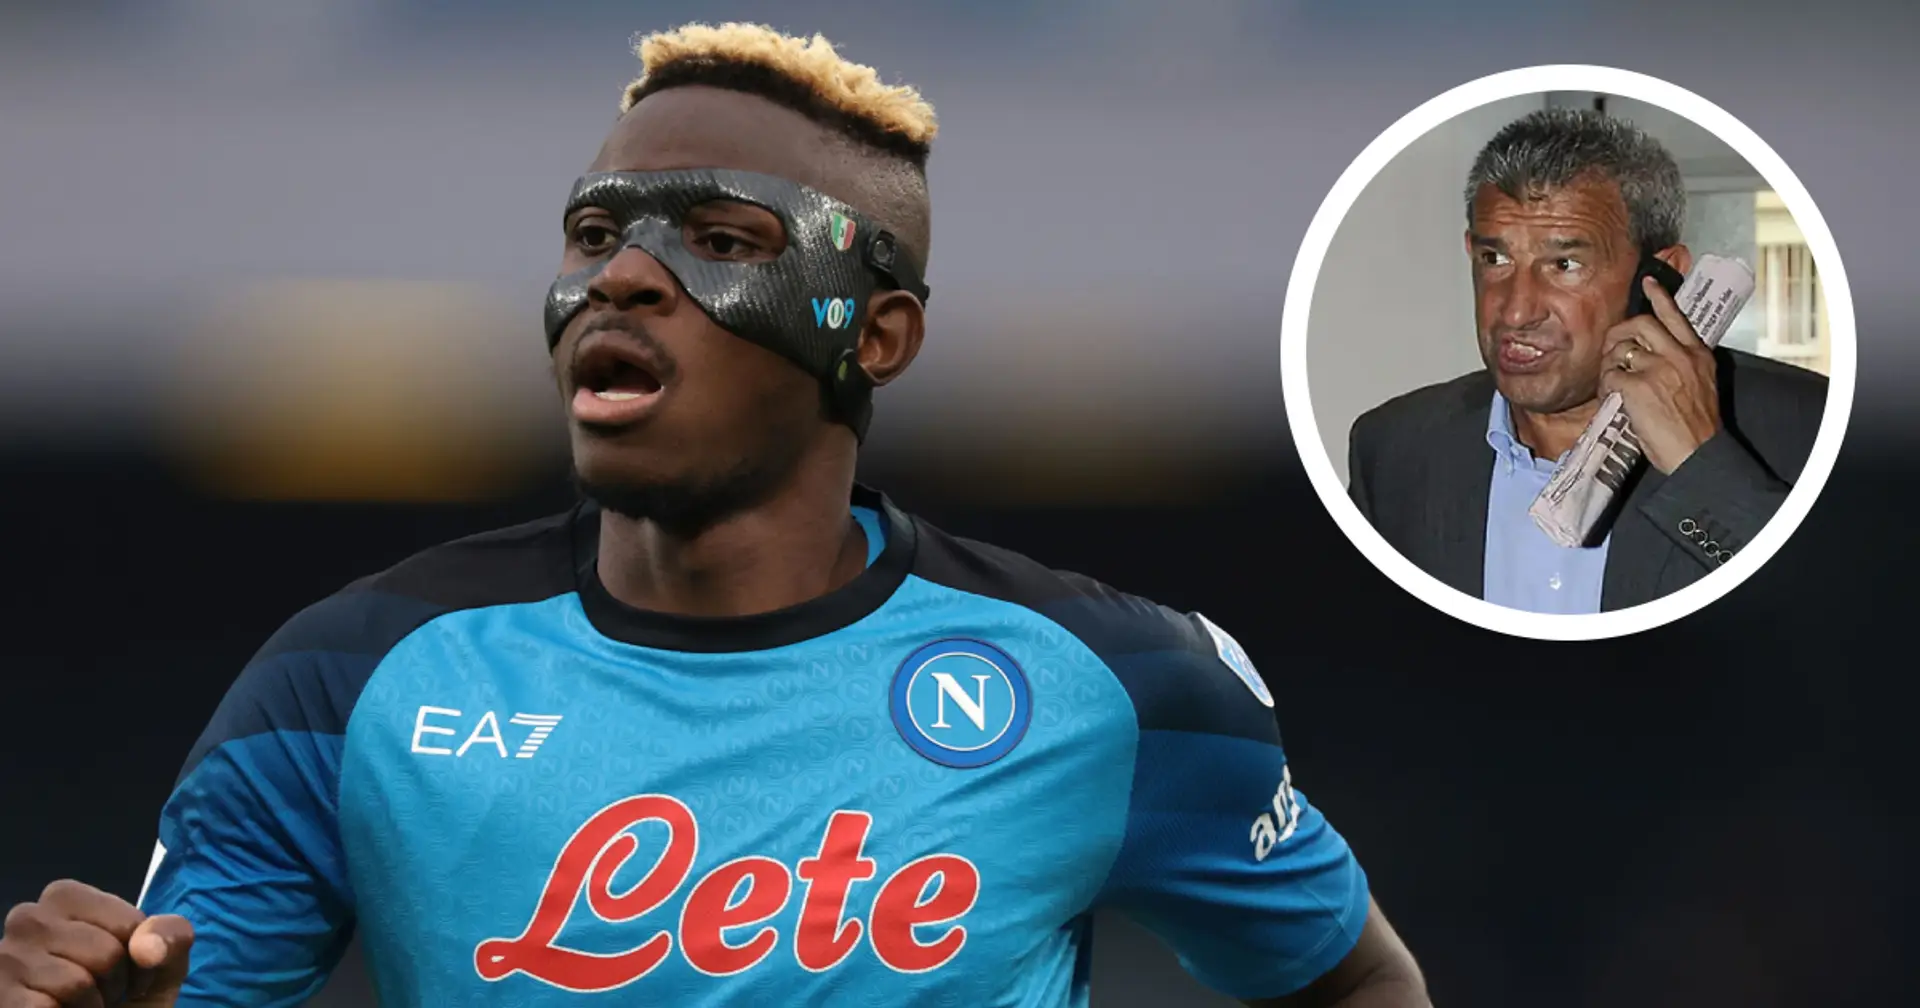 Ex-Napoli star Bagni names 2 teams Victor Osimhen wants to join — one is Man United